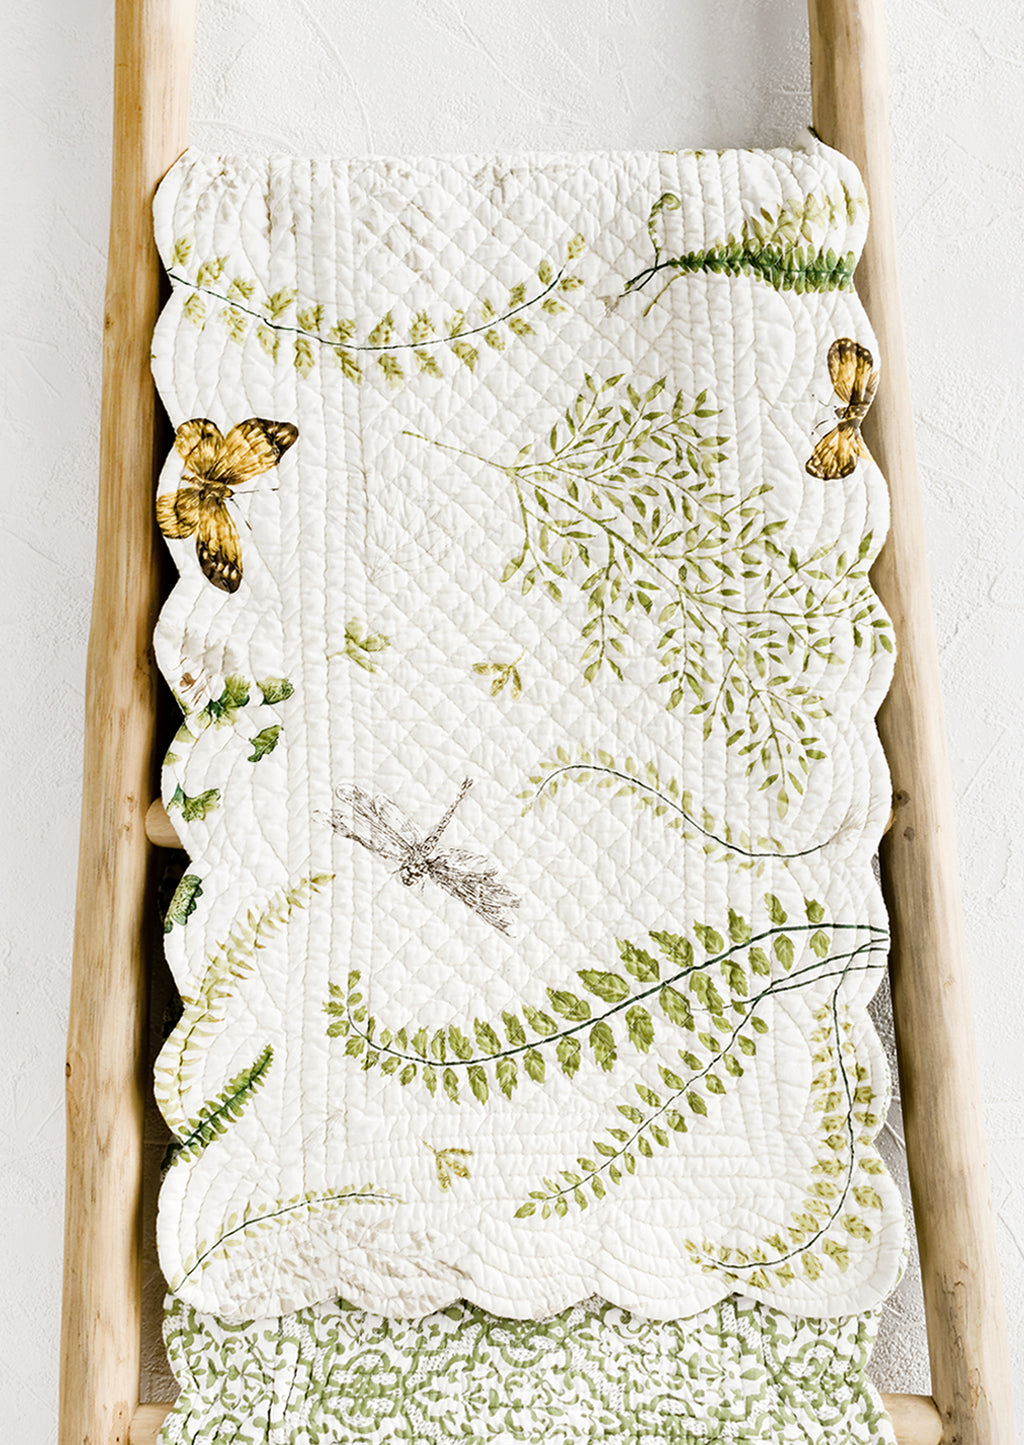 1: A quilted table runner with fern print.